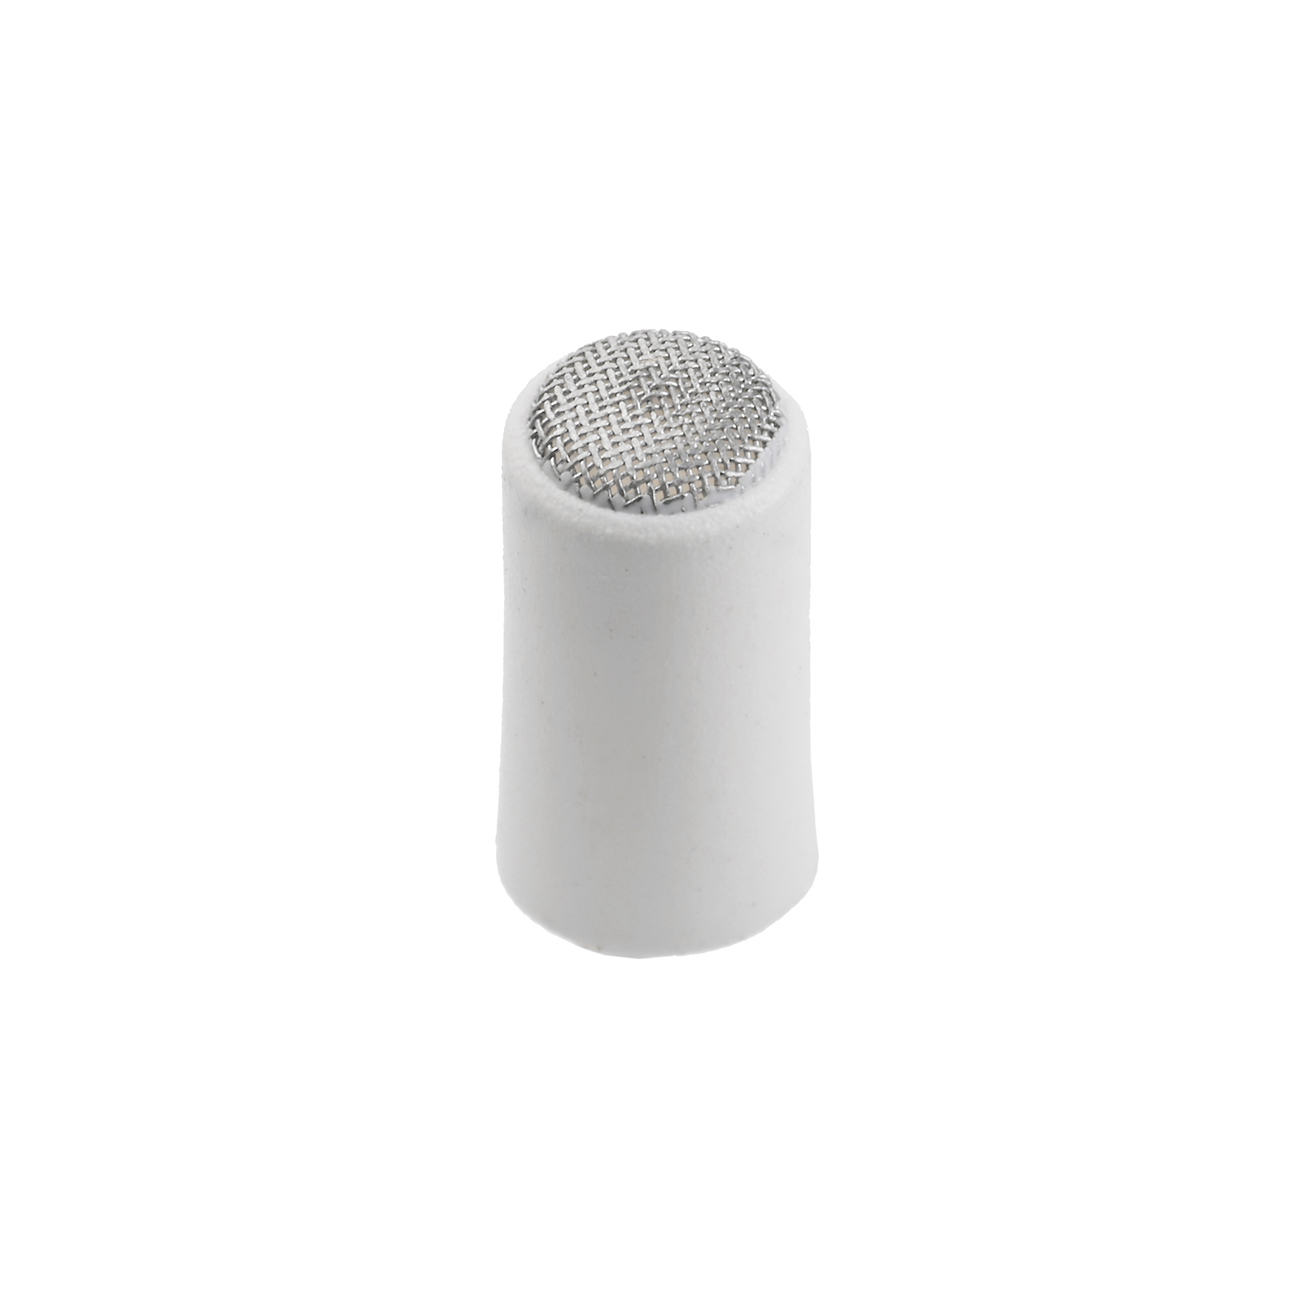 Small cap, white with gauze